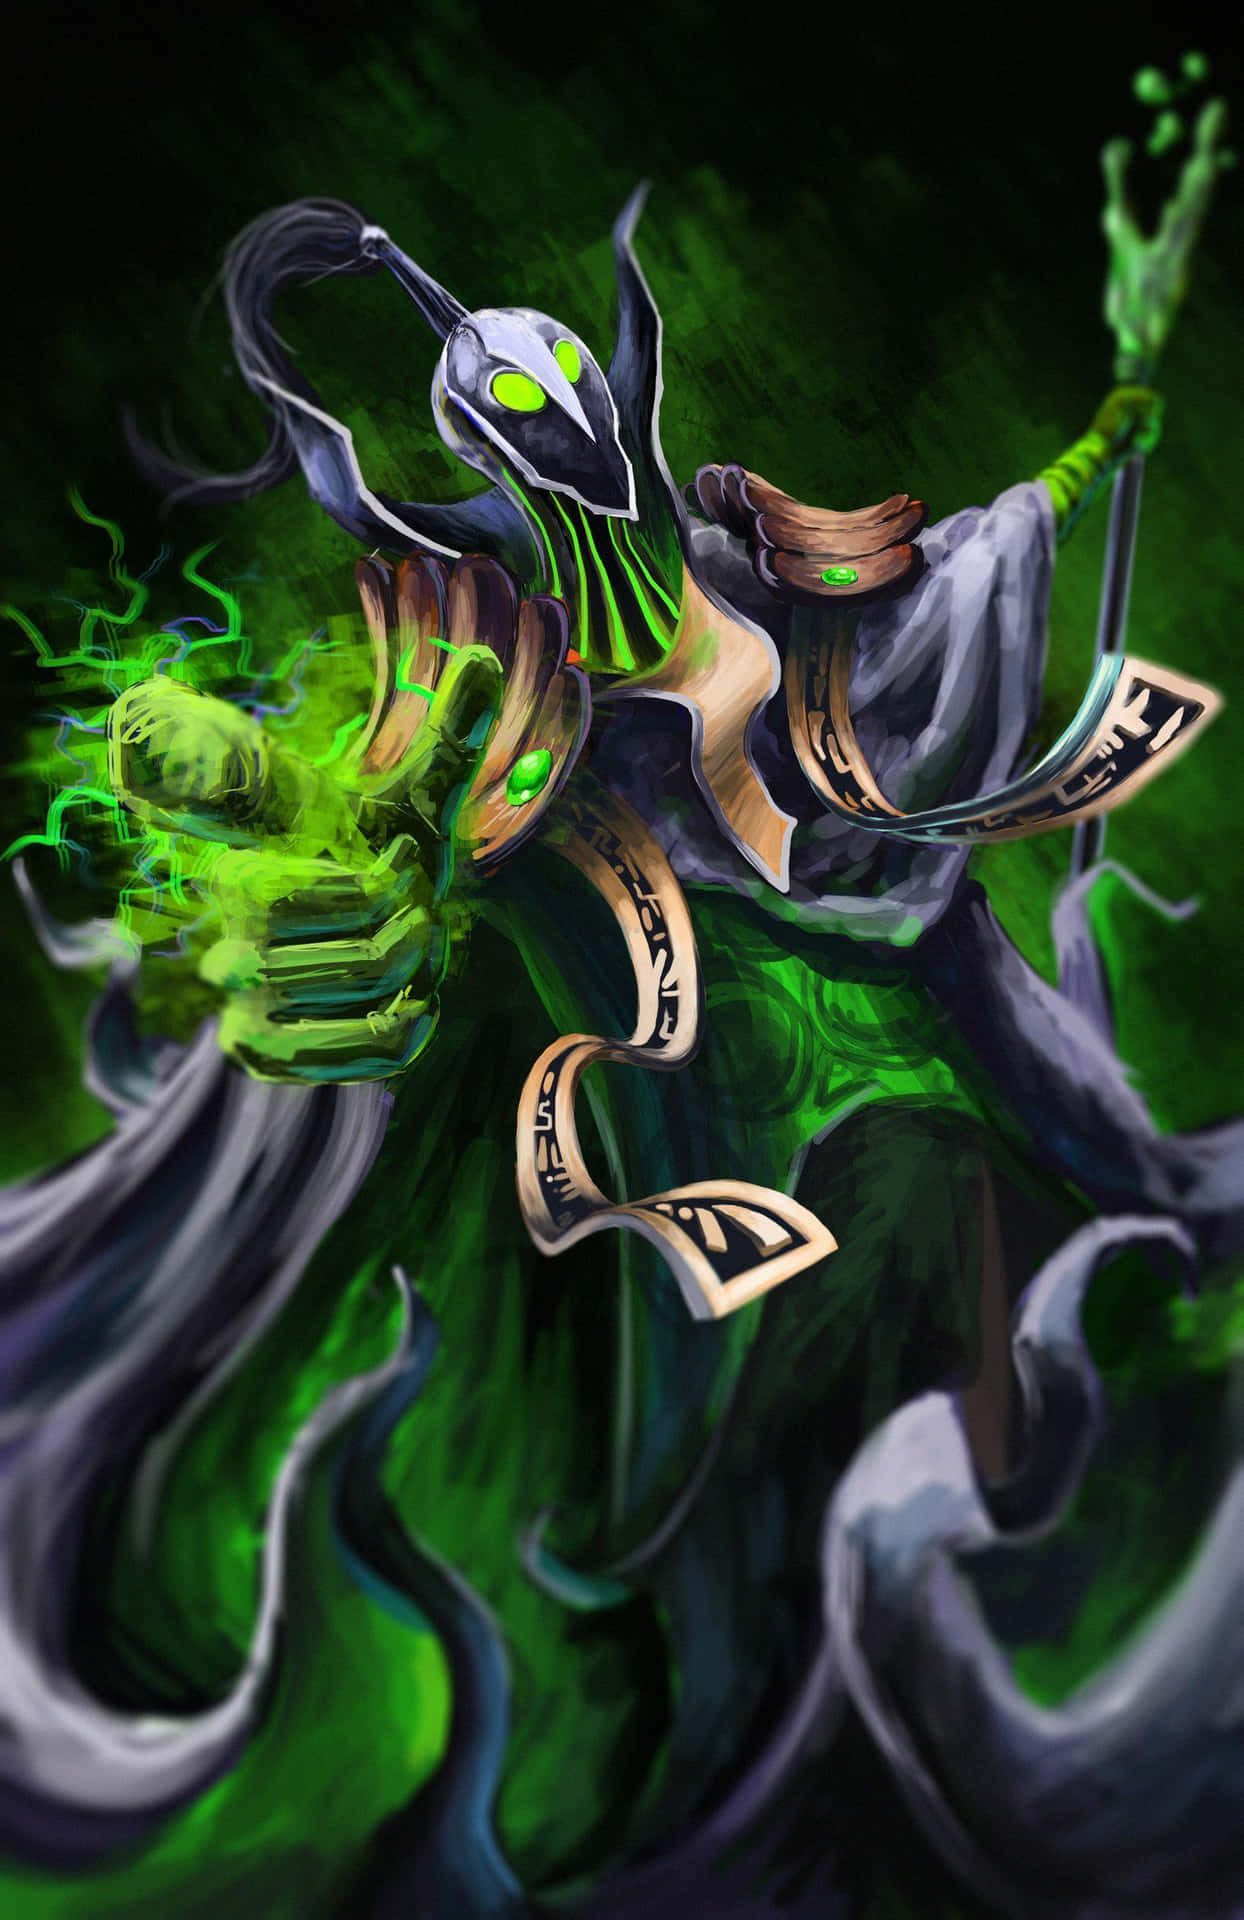 Rubick the Grand Magus in action, performing a powerful spell in the world of Dota 2 Wallpaper